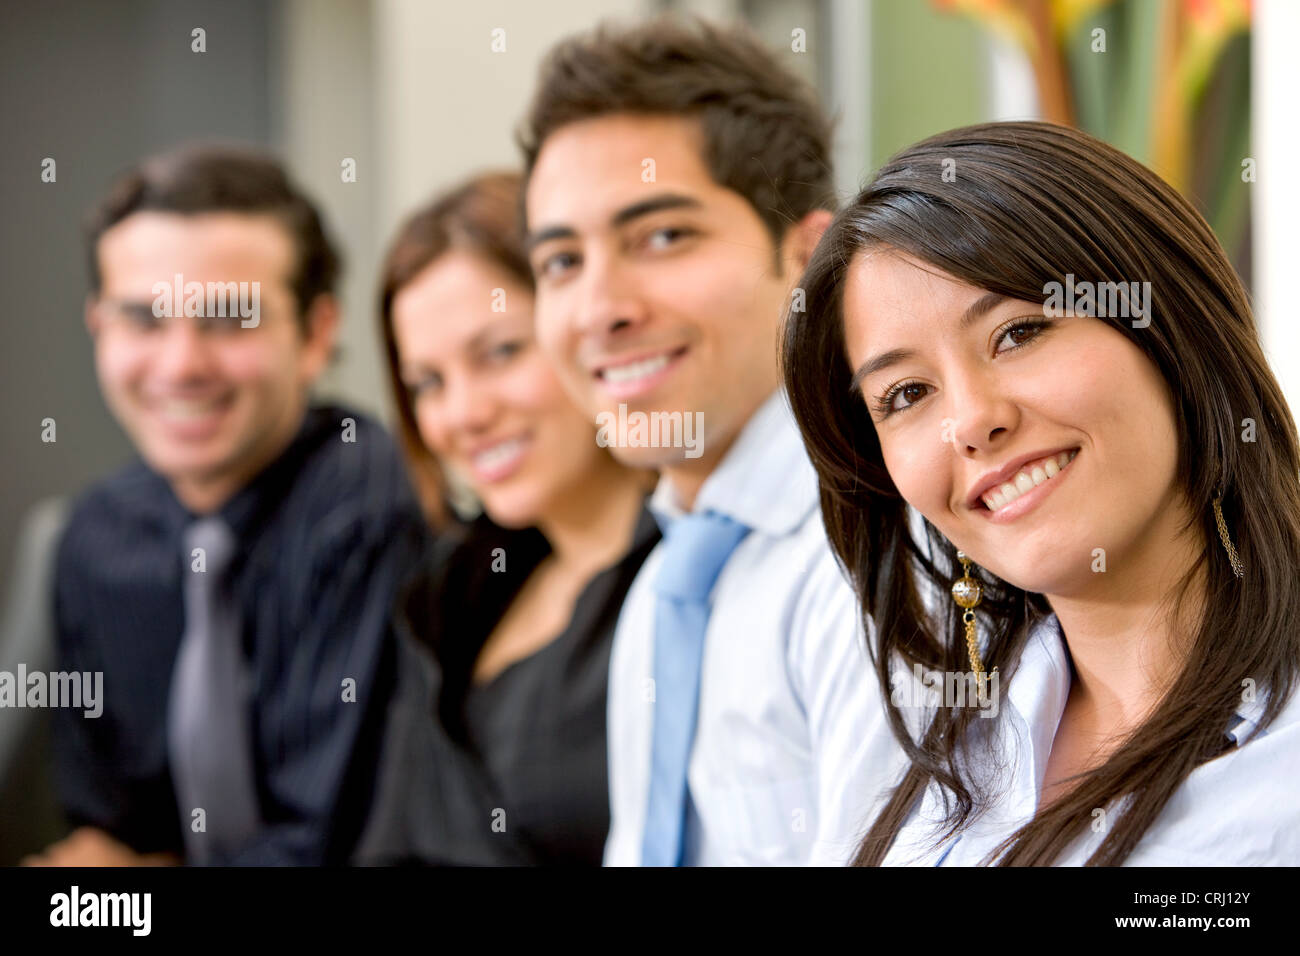 four smiling well-goomed young people, woman in the foreground Stock Photo